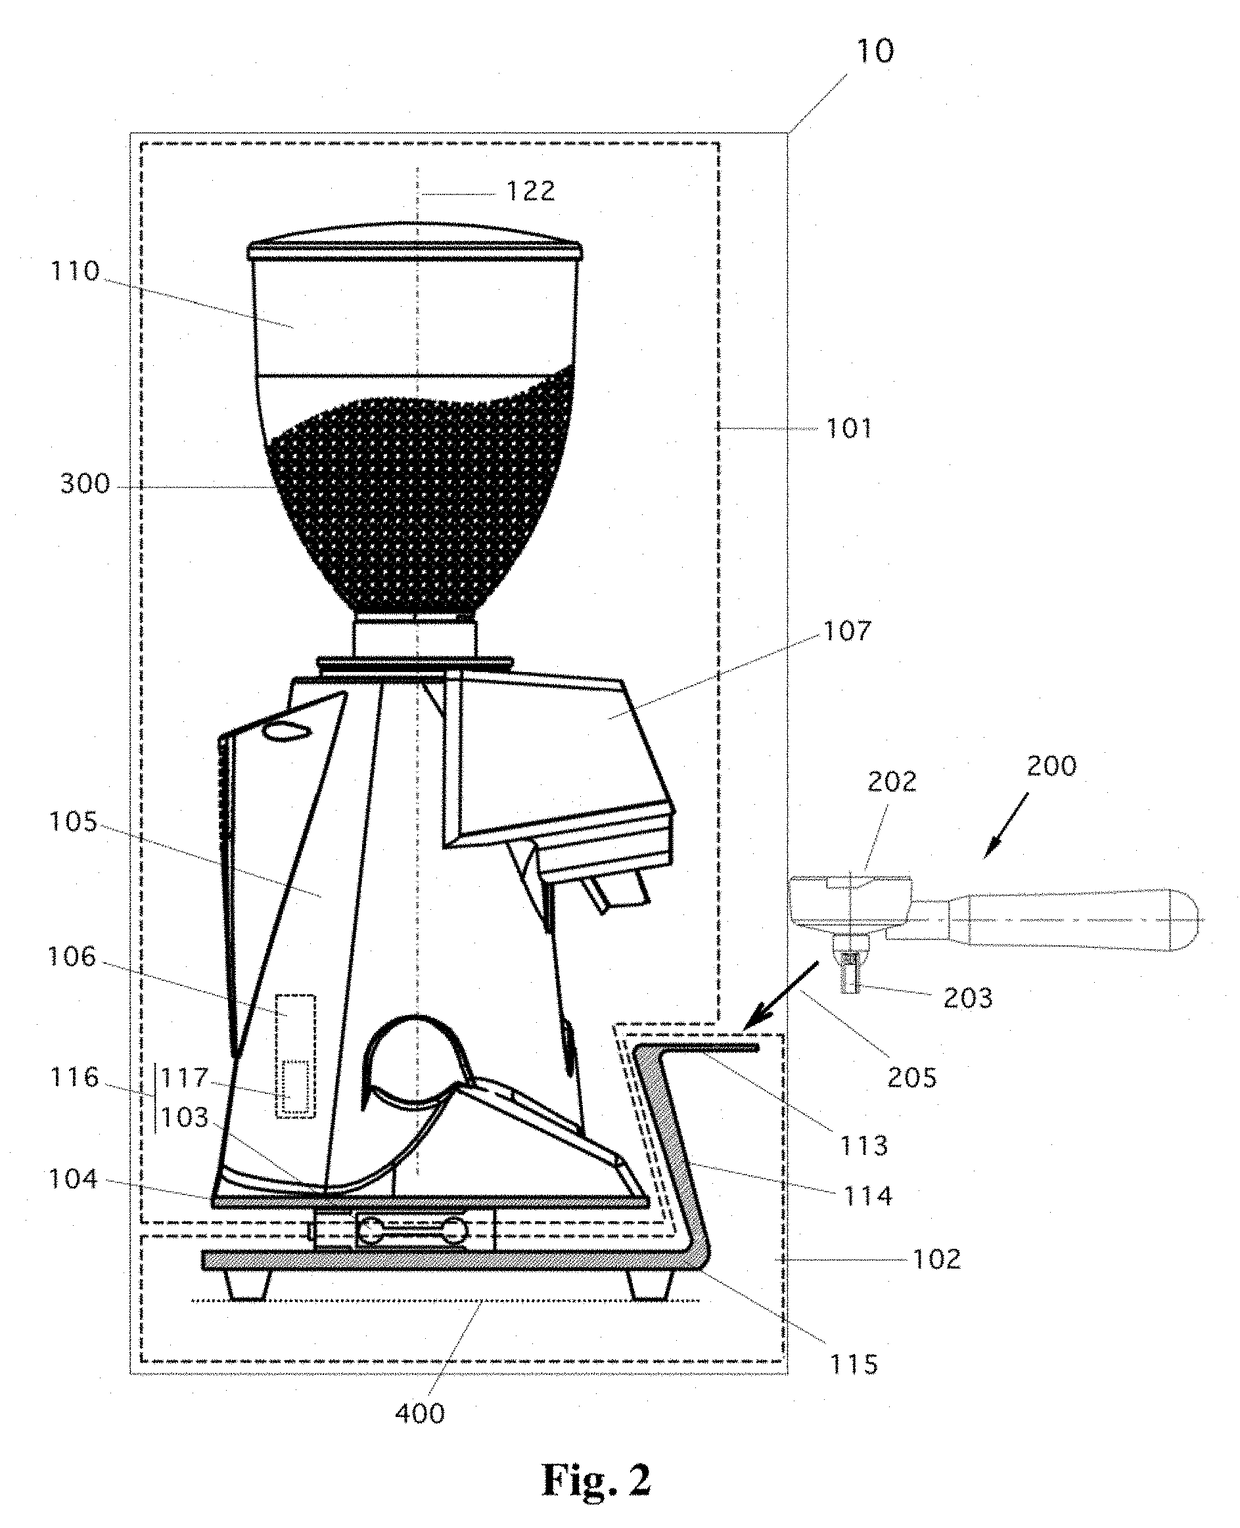 Coffee grinder-doser apparatus with independent fork and weighing device with feedback